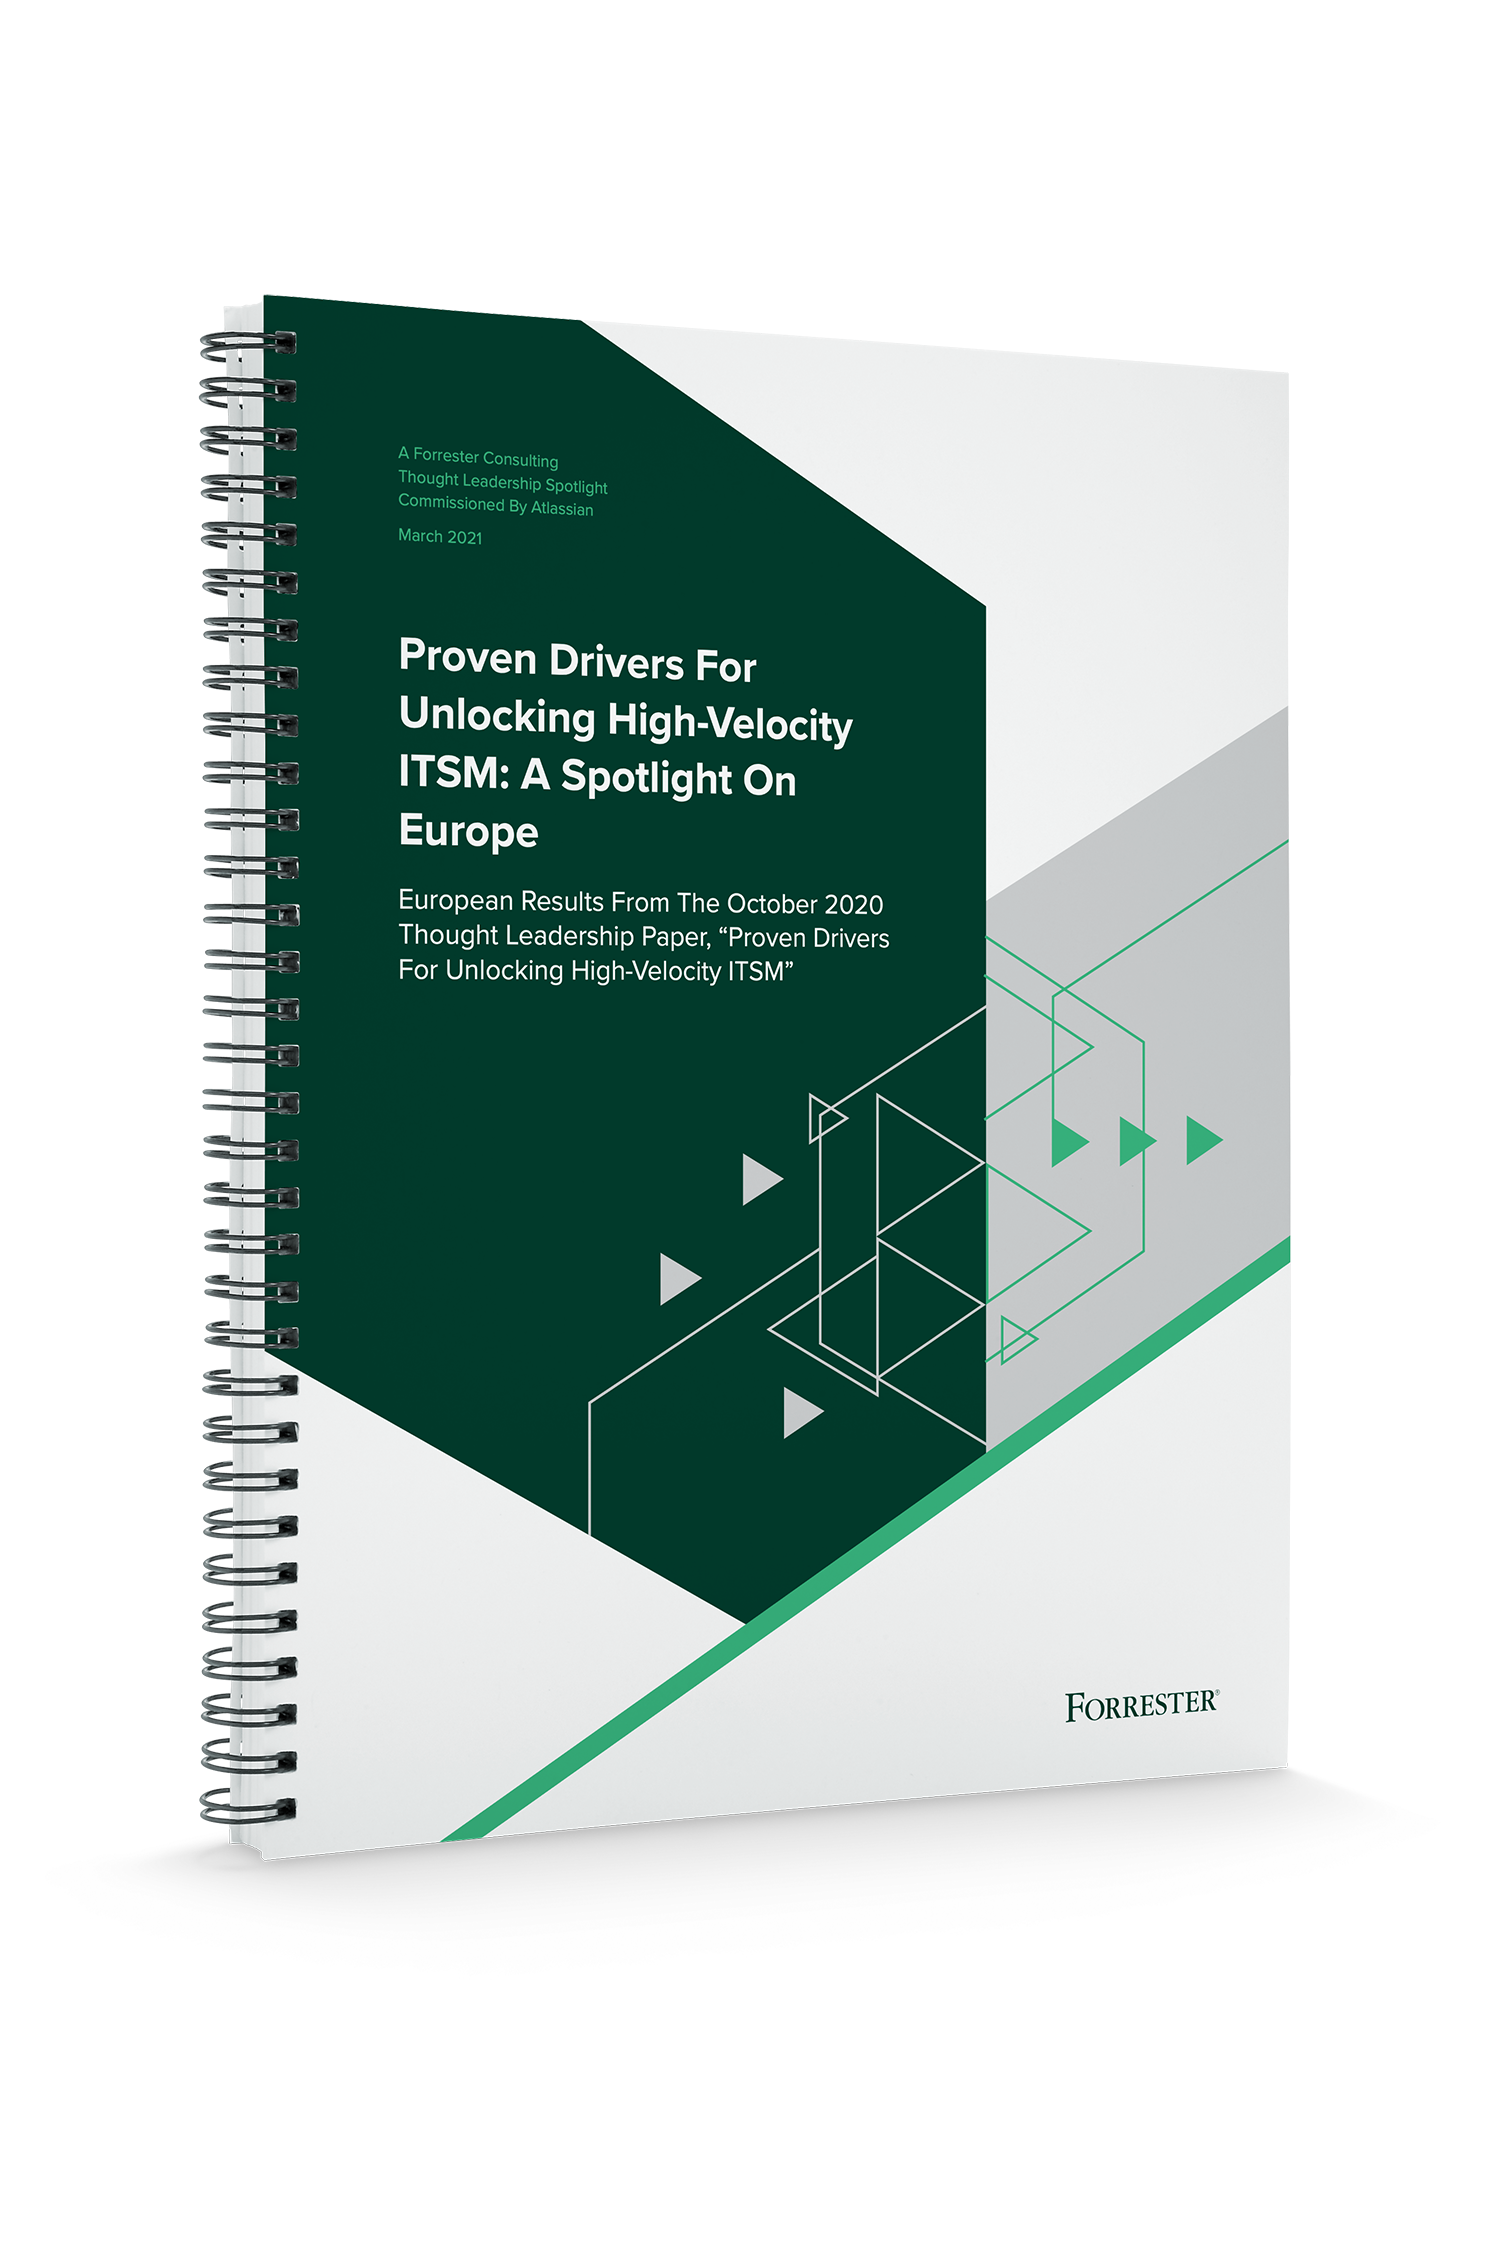 Forrester's “Proven Drivers for Unlocking High-Velocity ITSM"